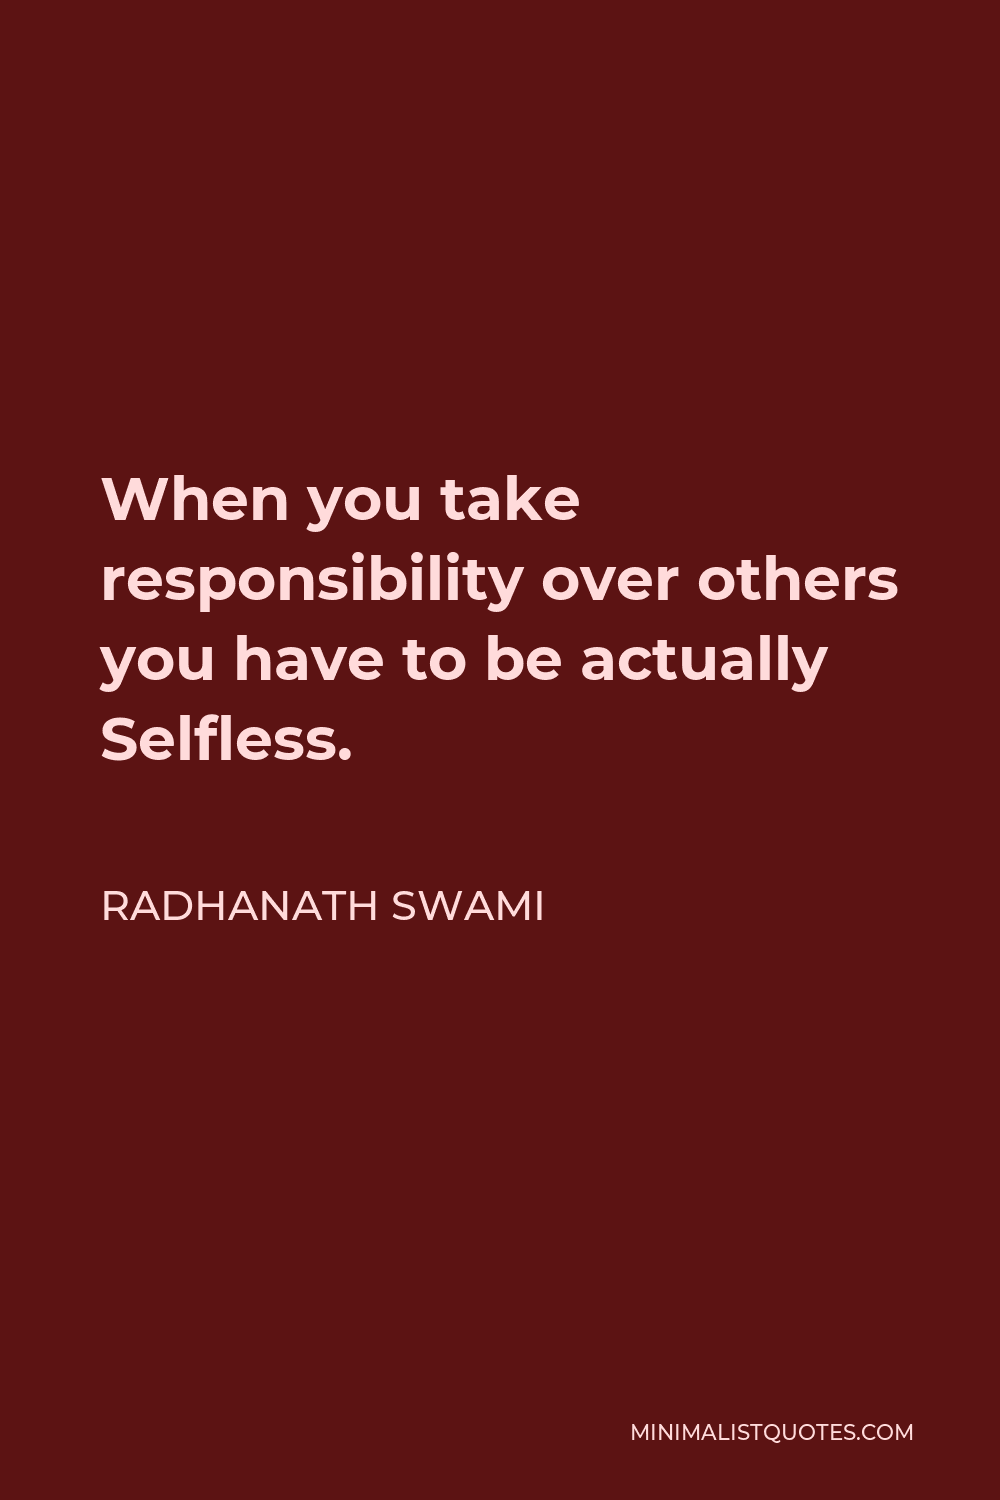 Radhanath Swami Quote - When you take responsibility over others you have to be actually Selfless.